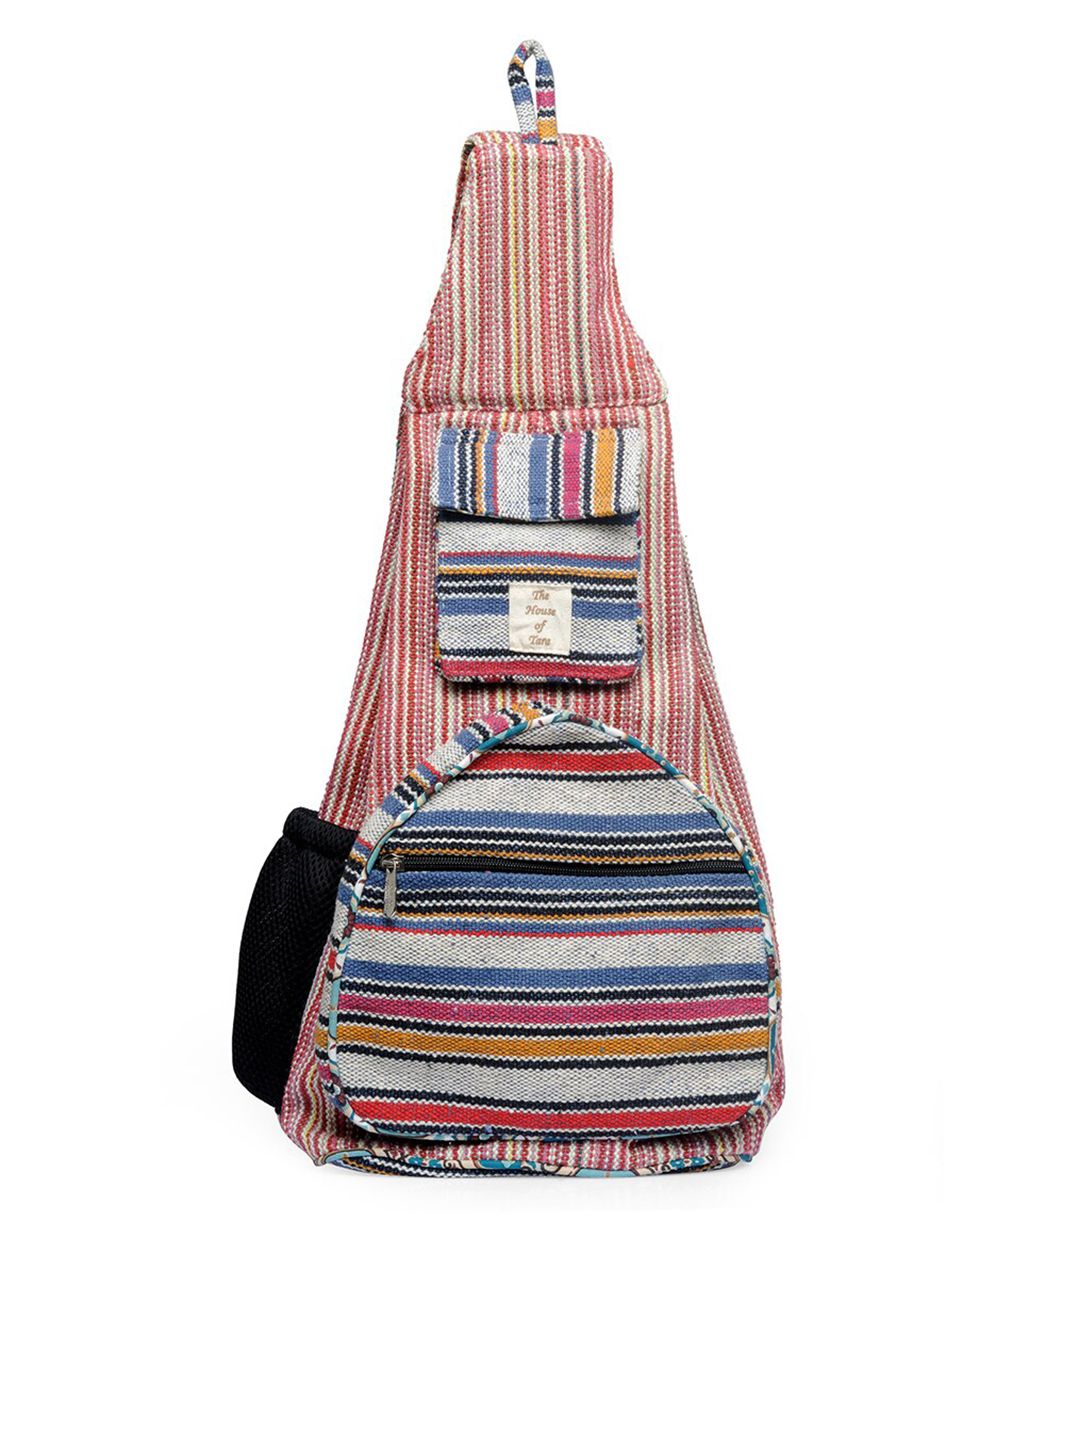 The House of Tara Unisex Red & White Striped Backpack Price in India